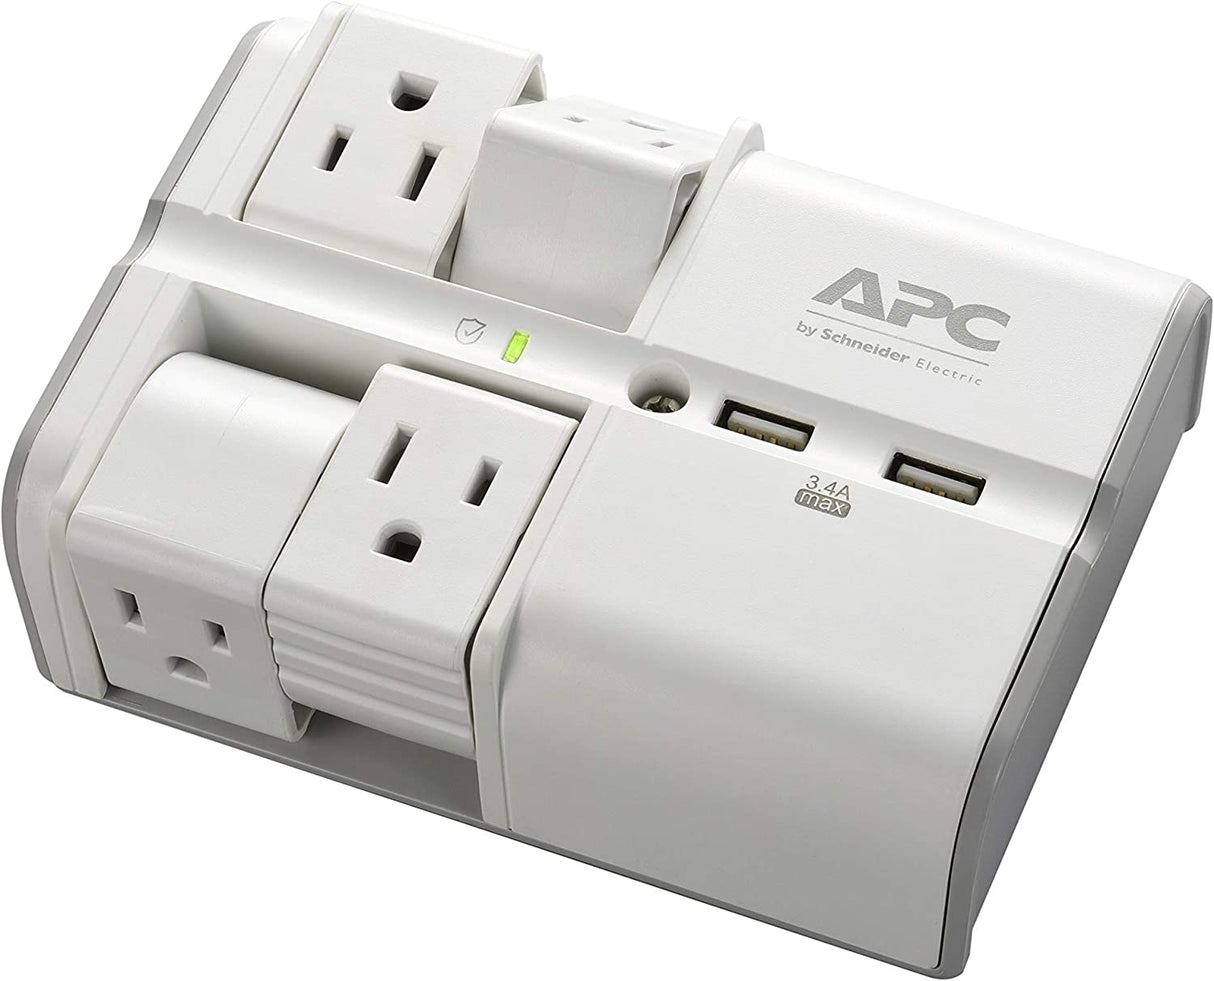 APC Wall Outlet Surge Protector with USB Ports, PE4WRU3, (4) Rotating Multi Plug Outlet, 1080 Joule Surge Protection 4 Rotating Outlets